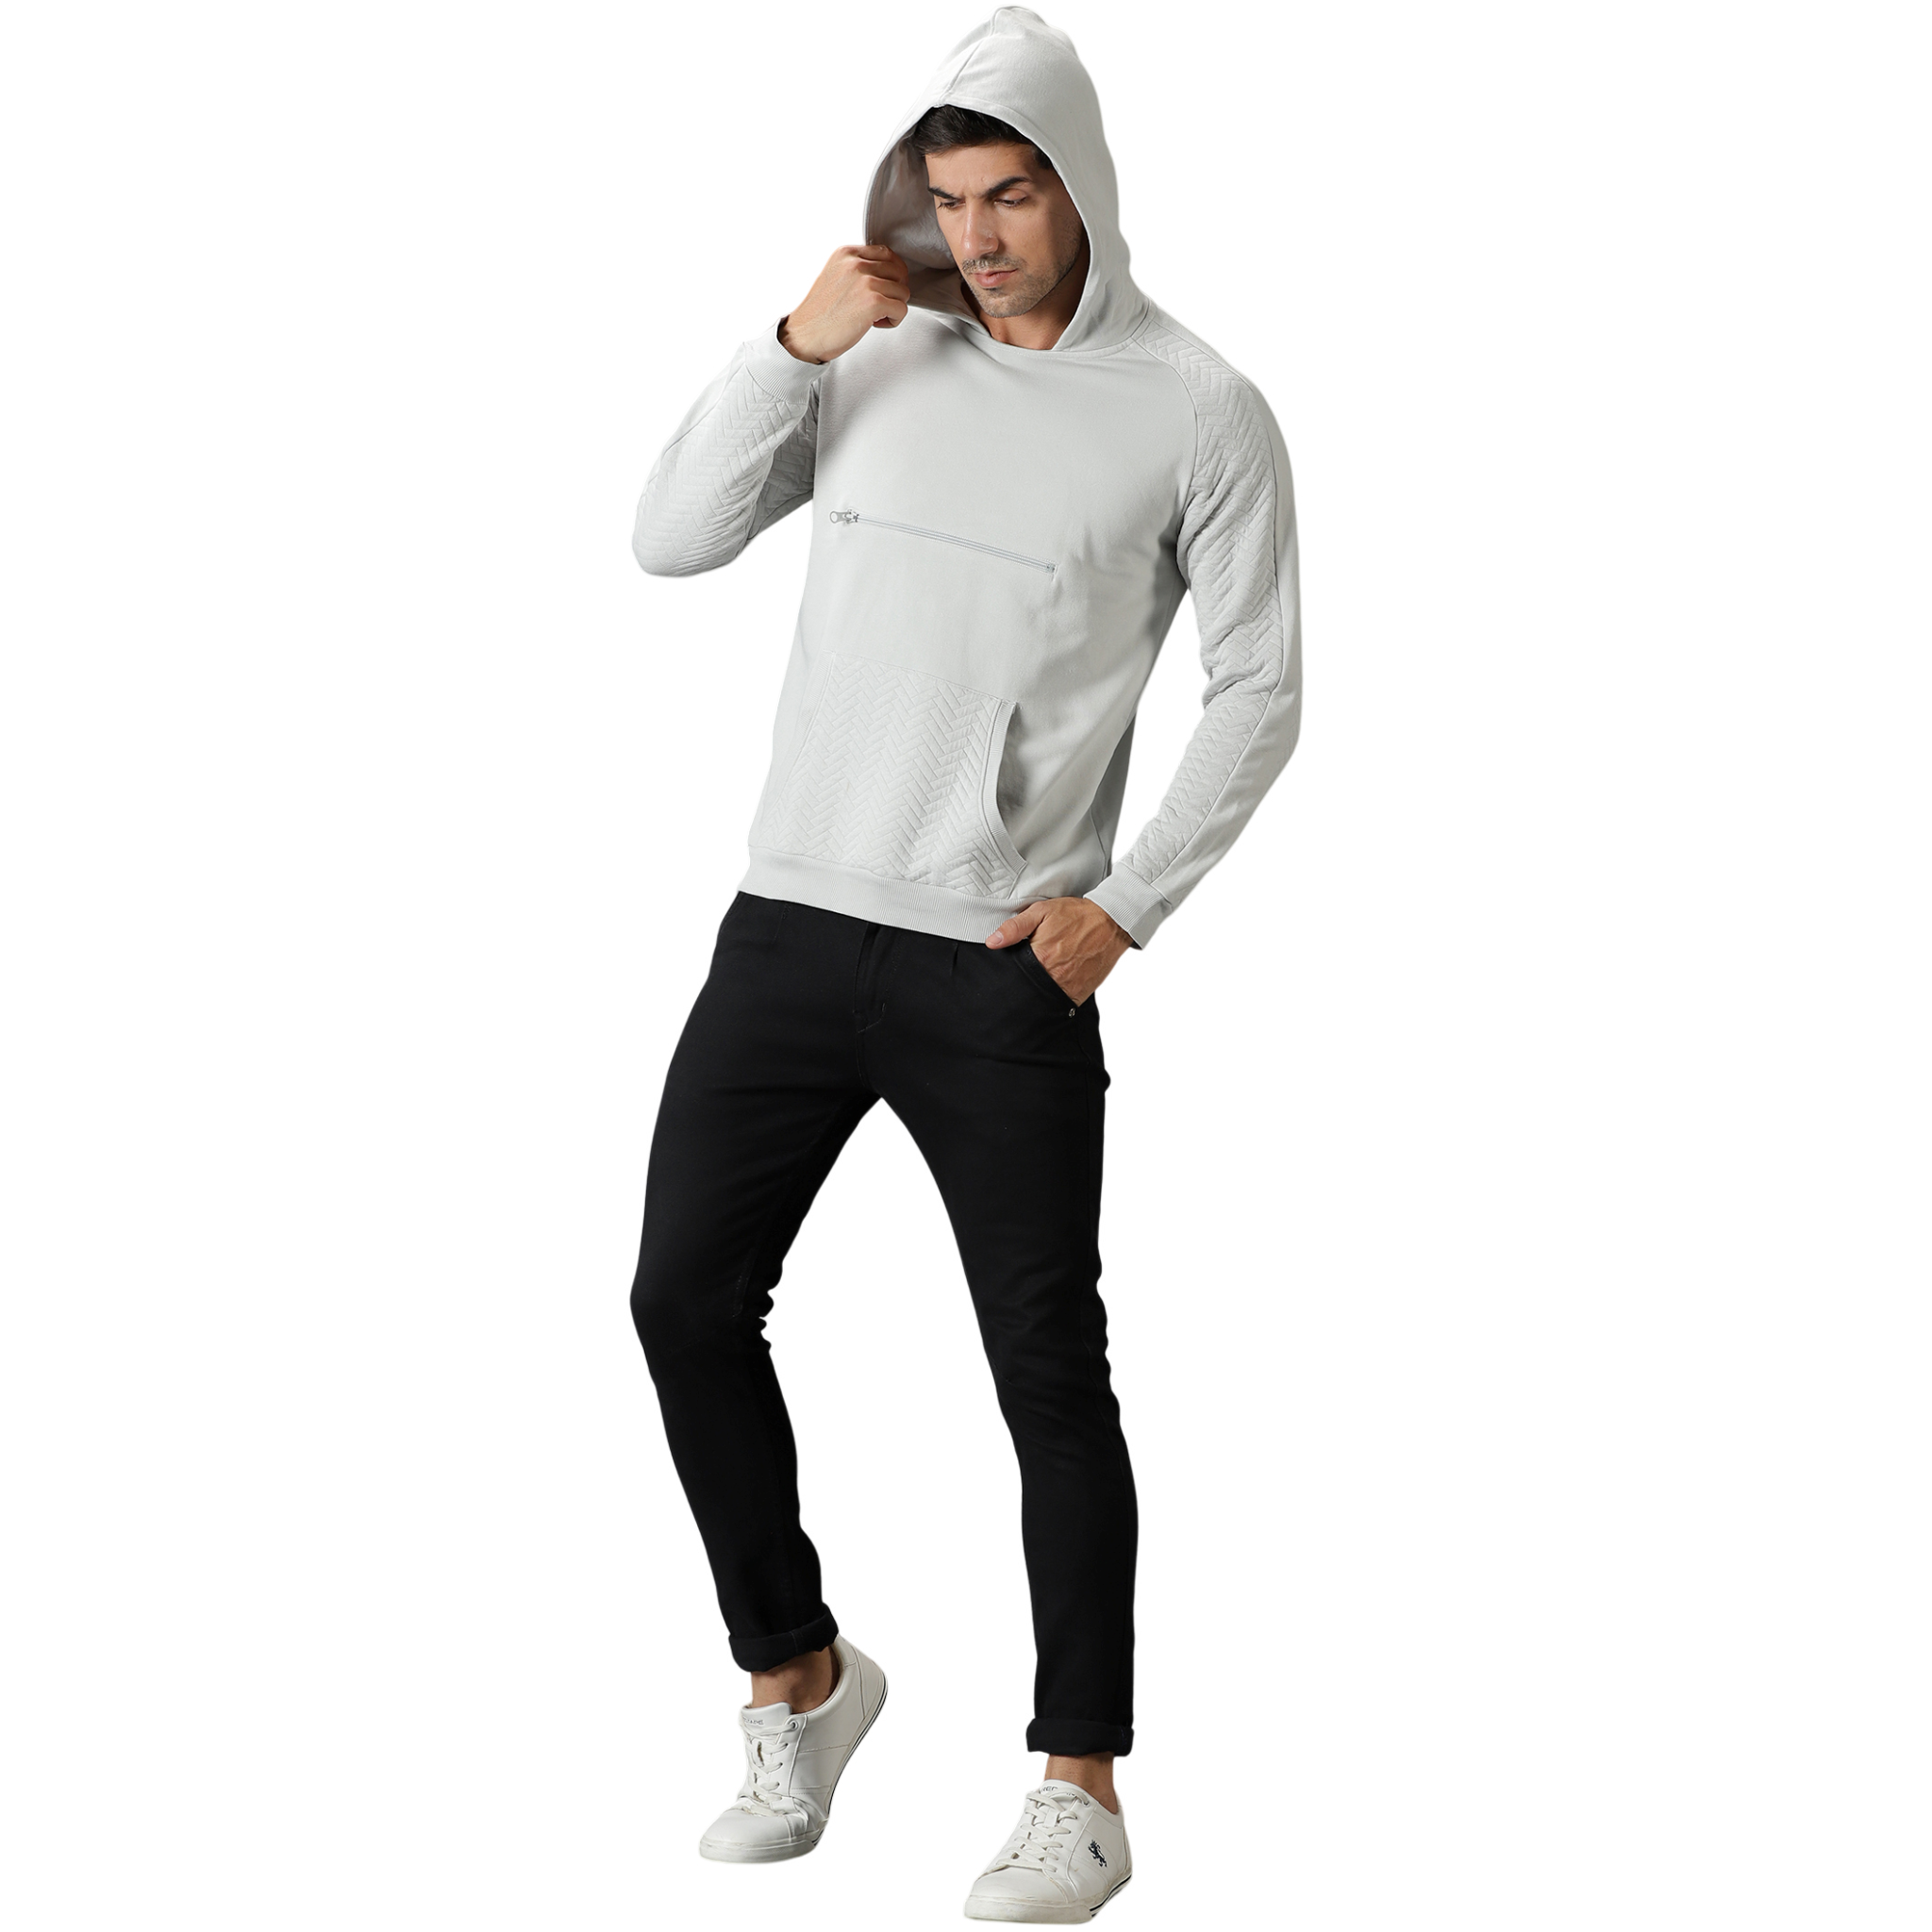 Men's Quilted Hooded Sweat Shirt with Kangaroo Pockets.